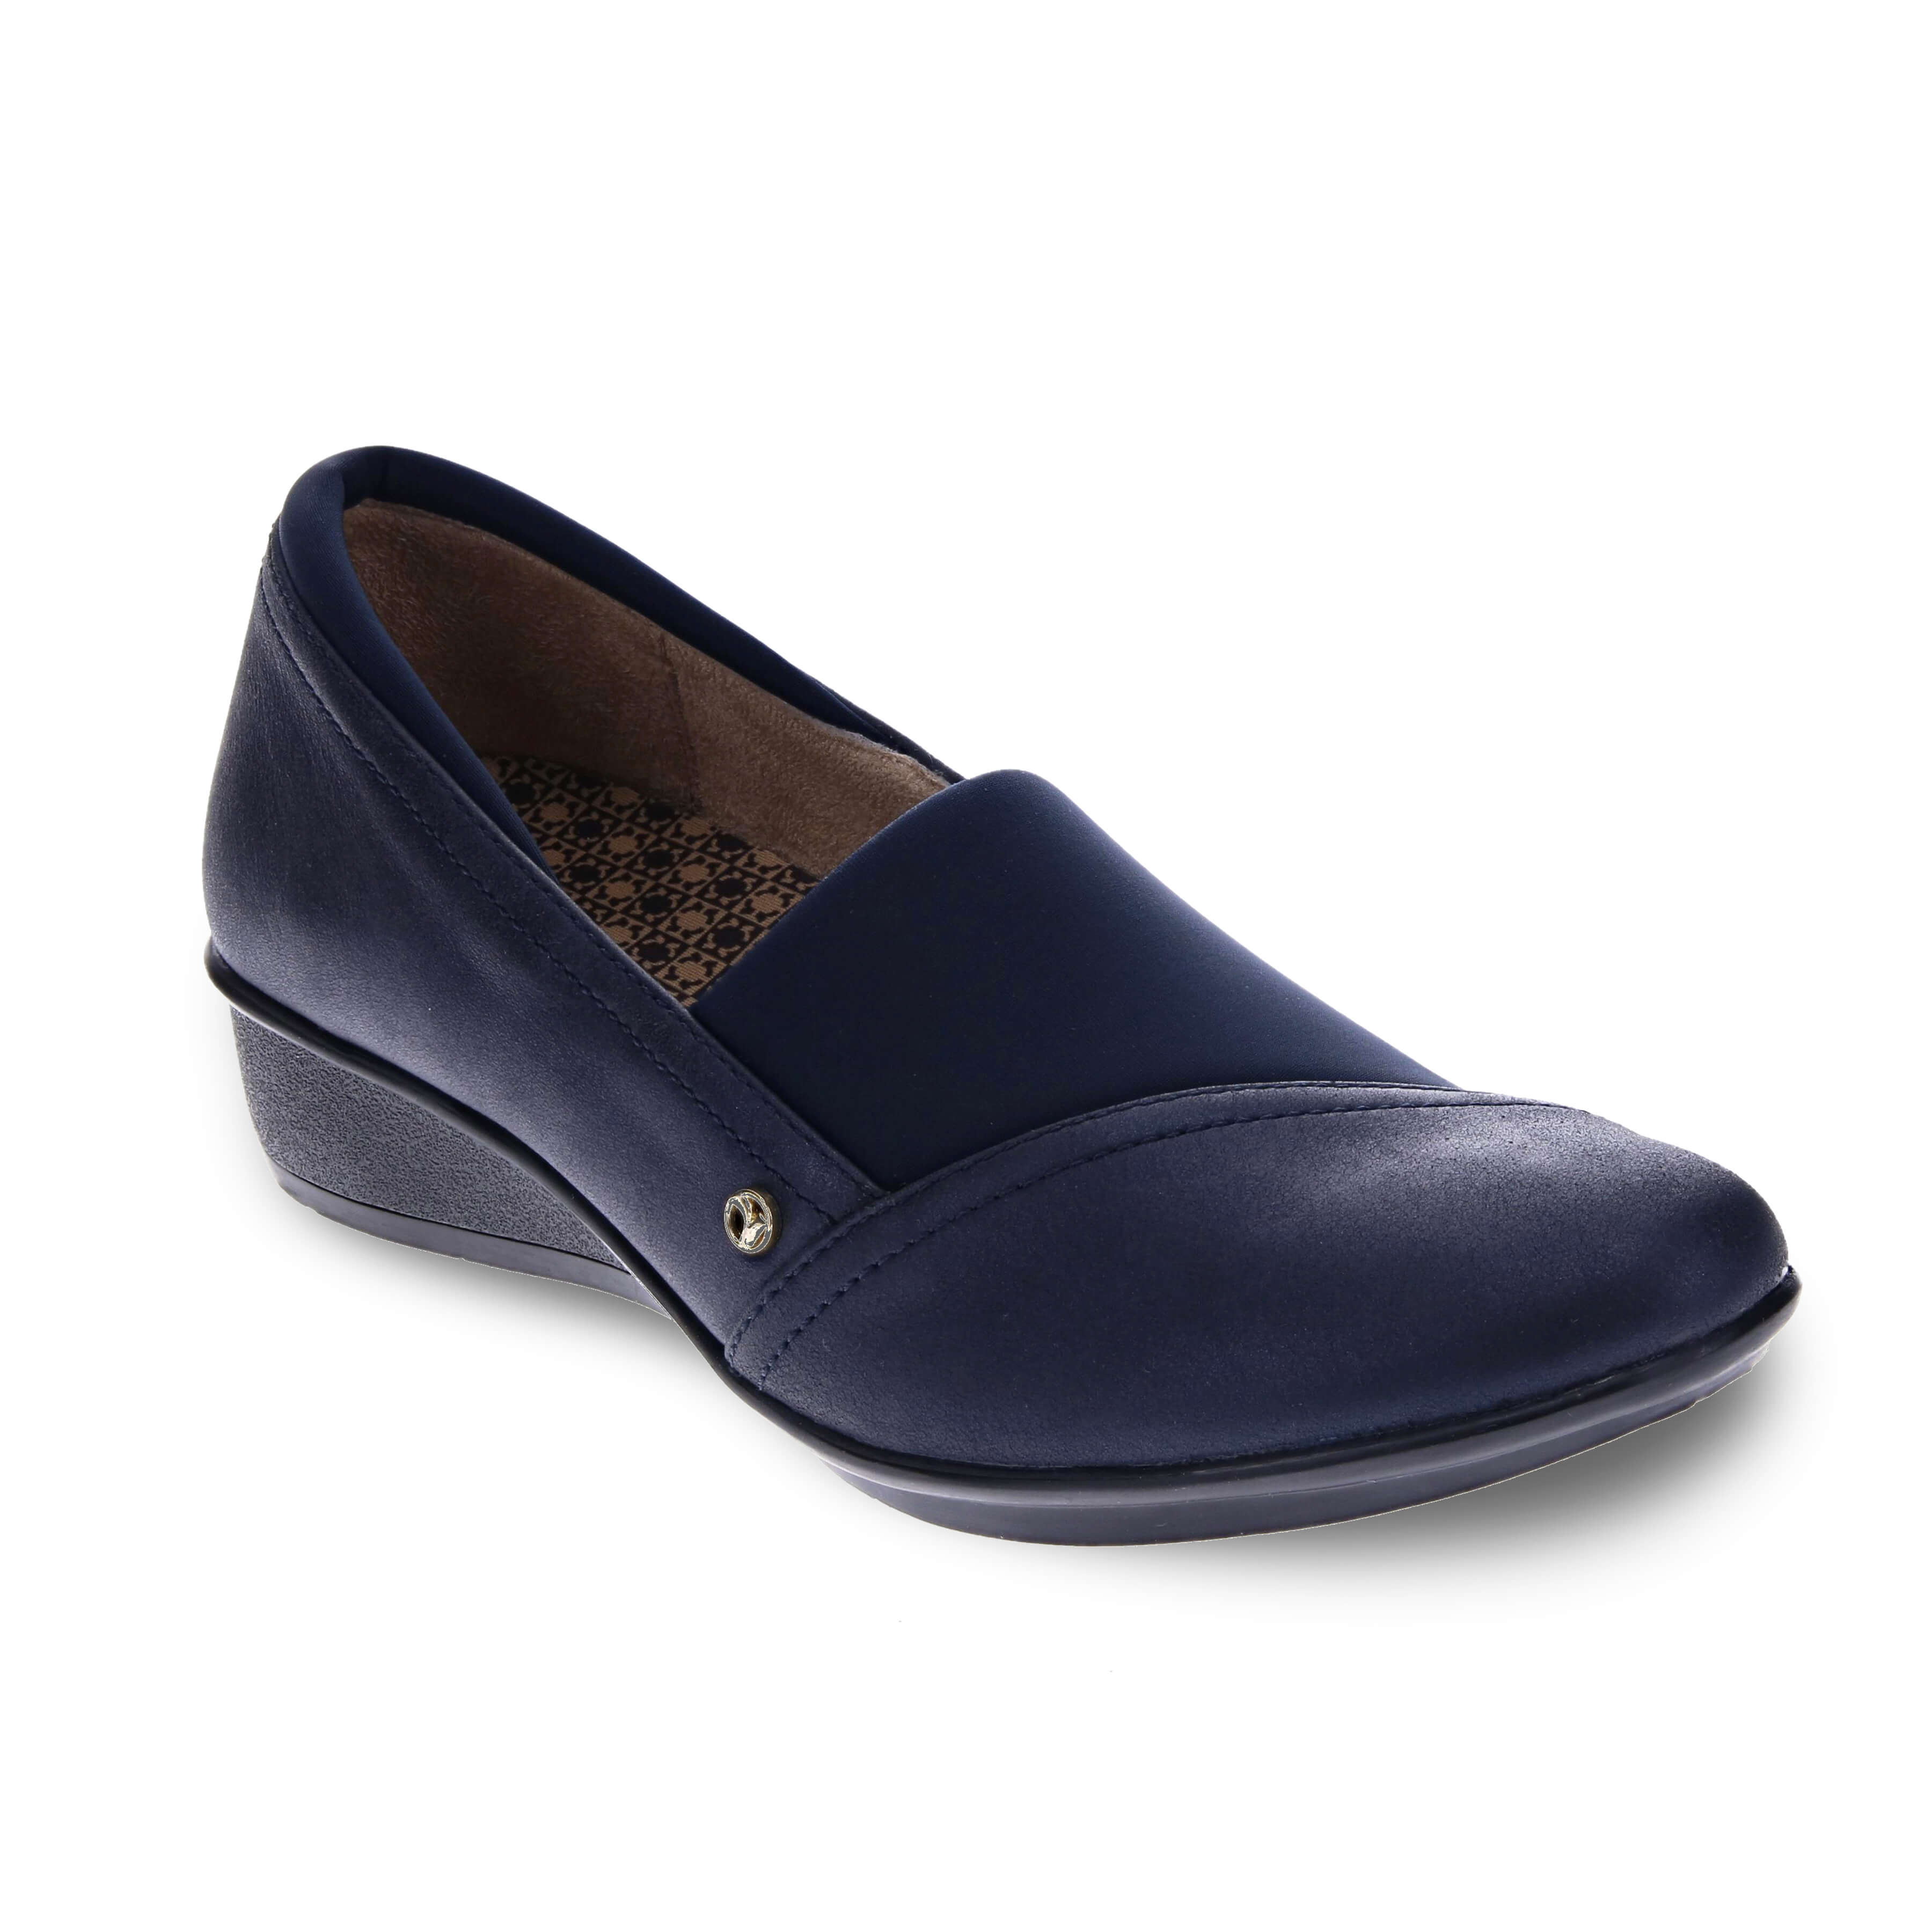 Revere Naples - Women's Casual Loafer With Wedge - Extra Depth With Removable Footbeds